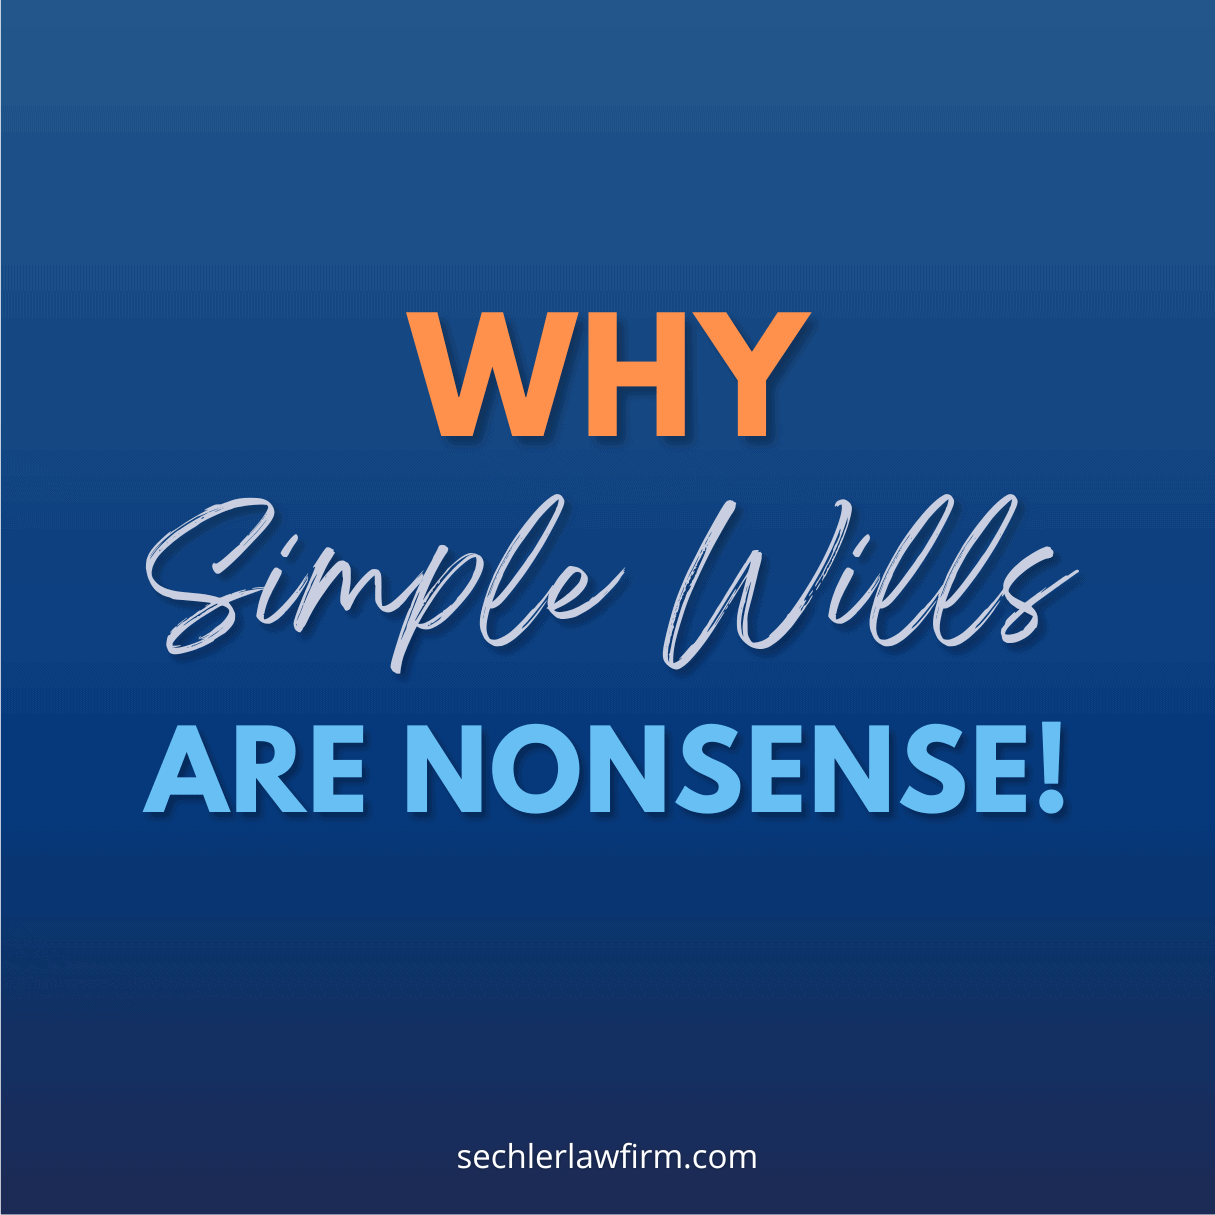 Why “Simple Wills” are Nonsense